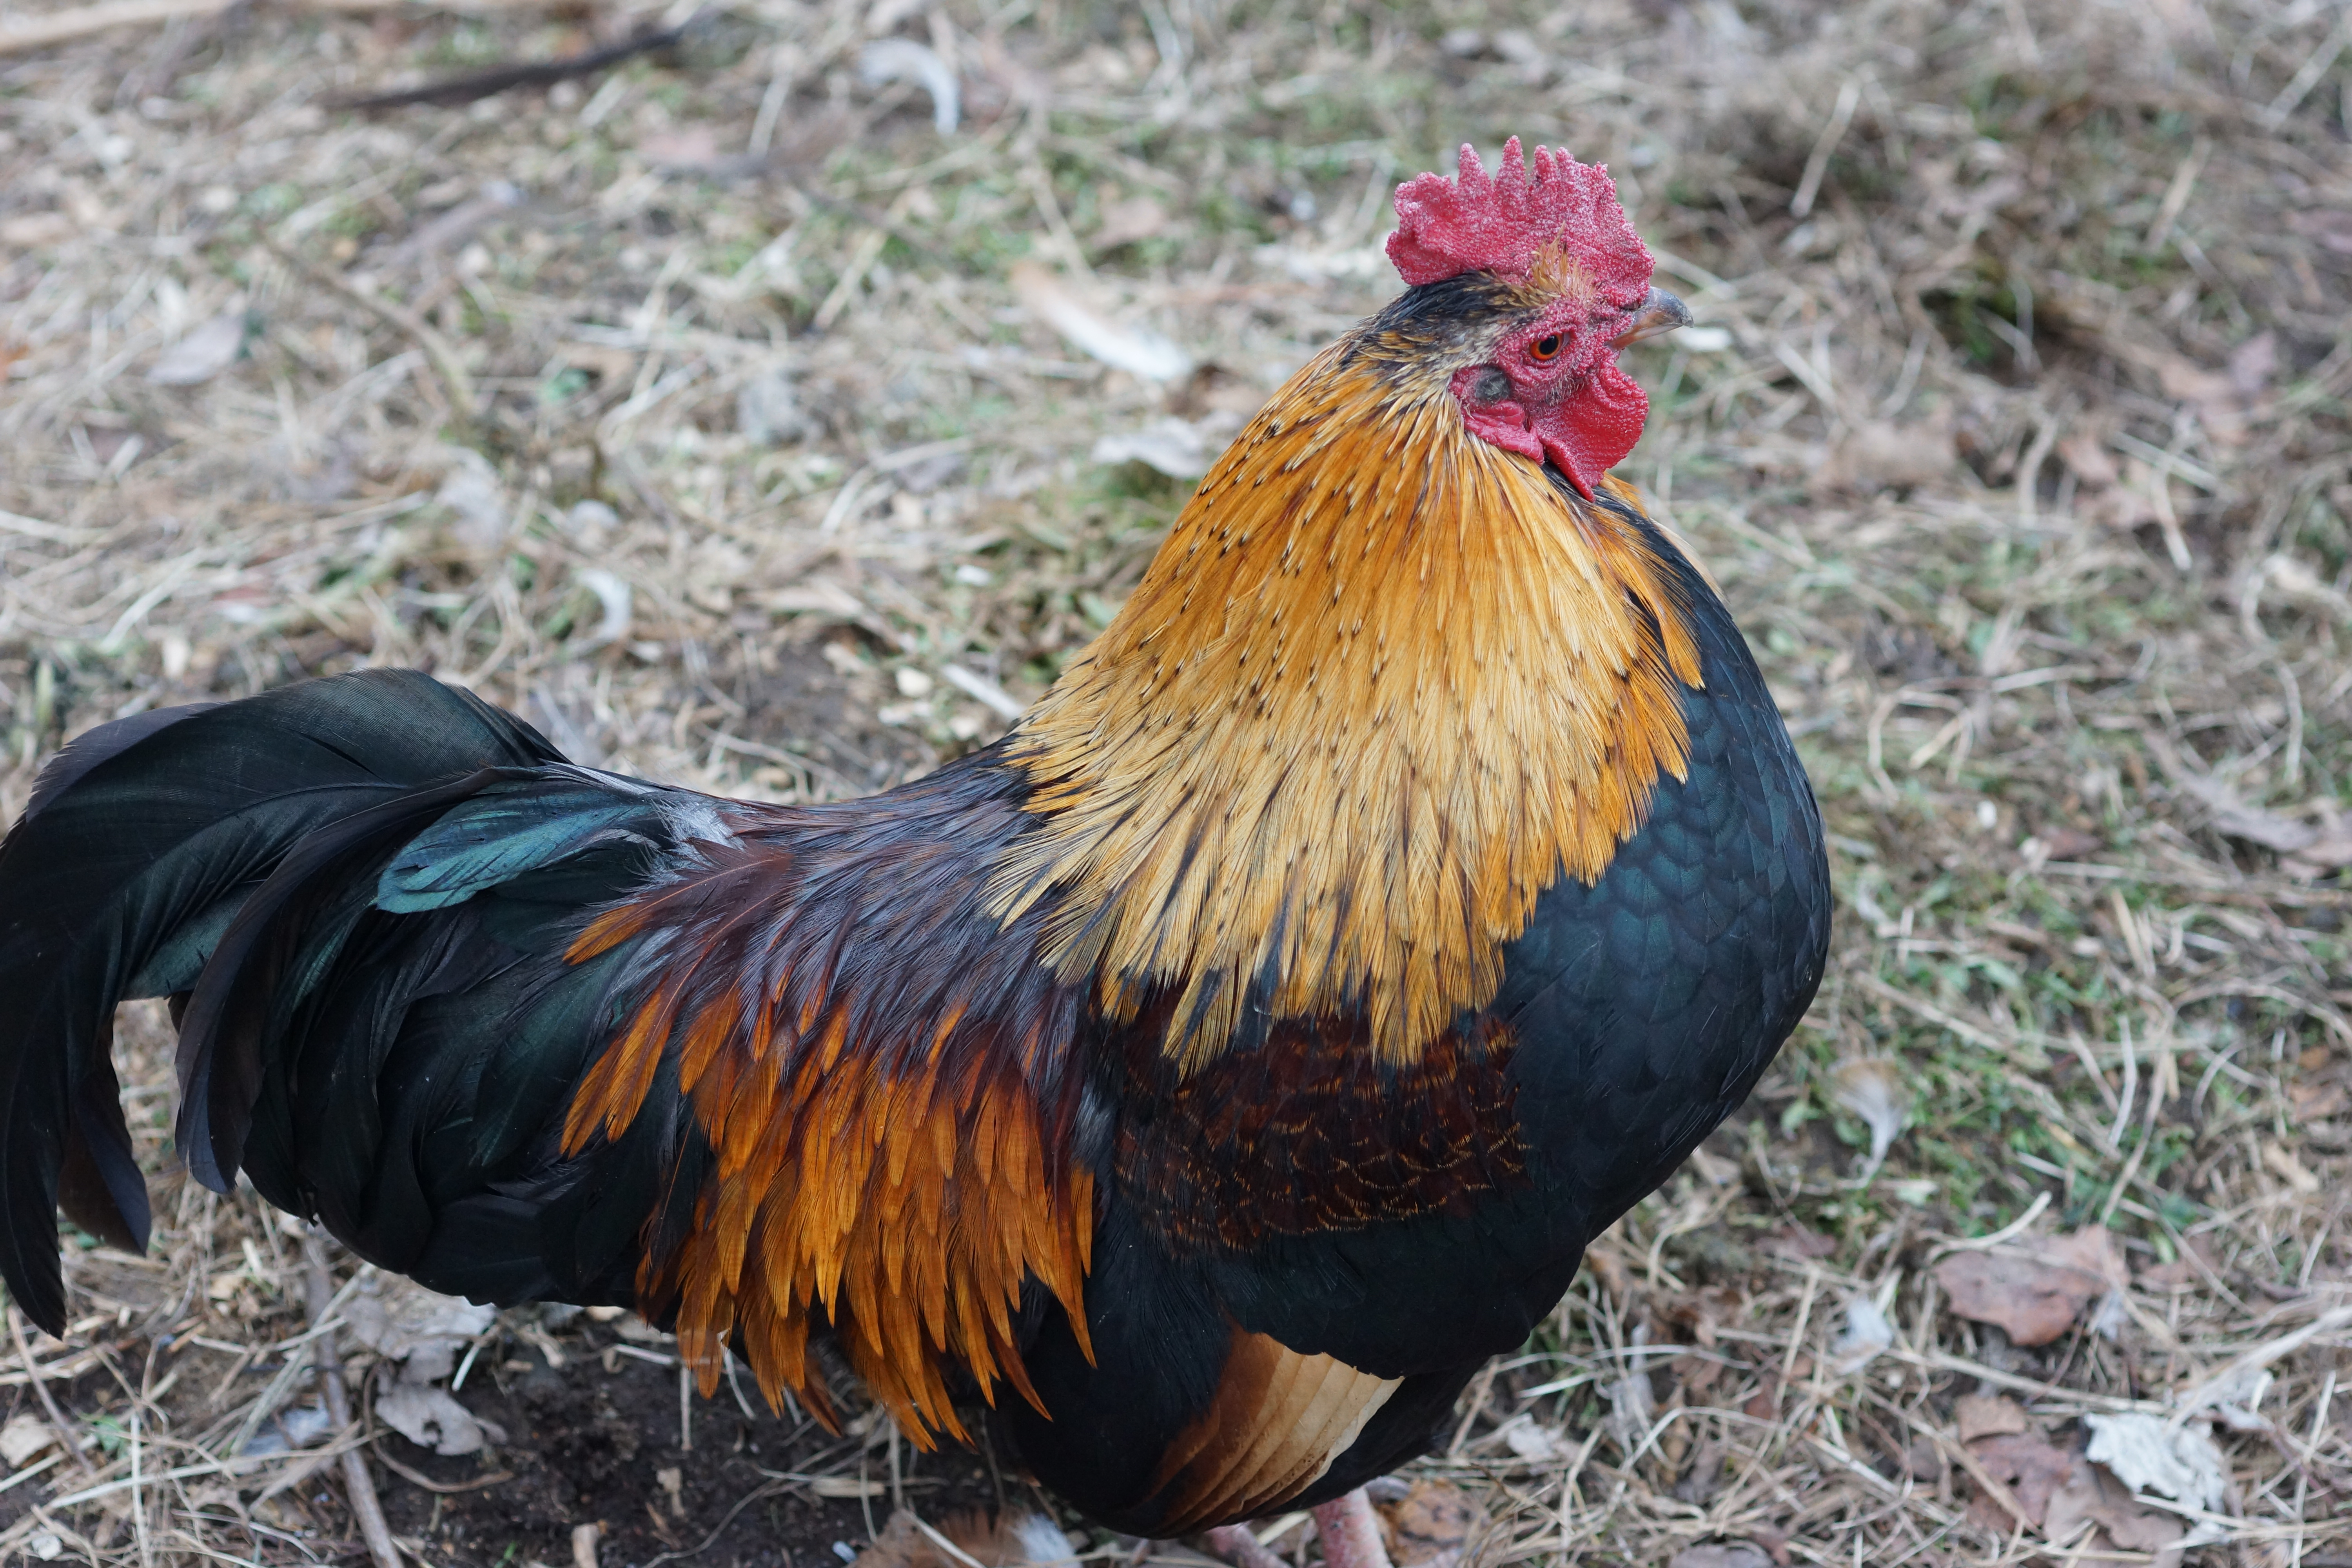 Chicky the mixed breed rooster